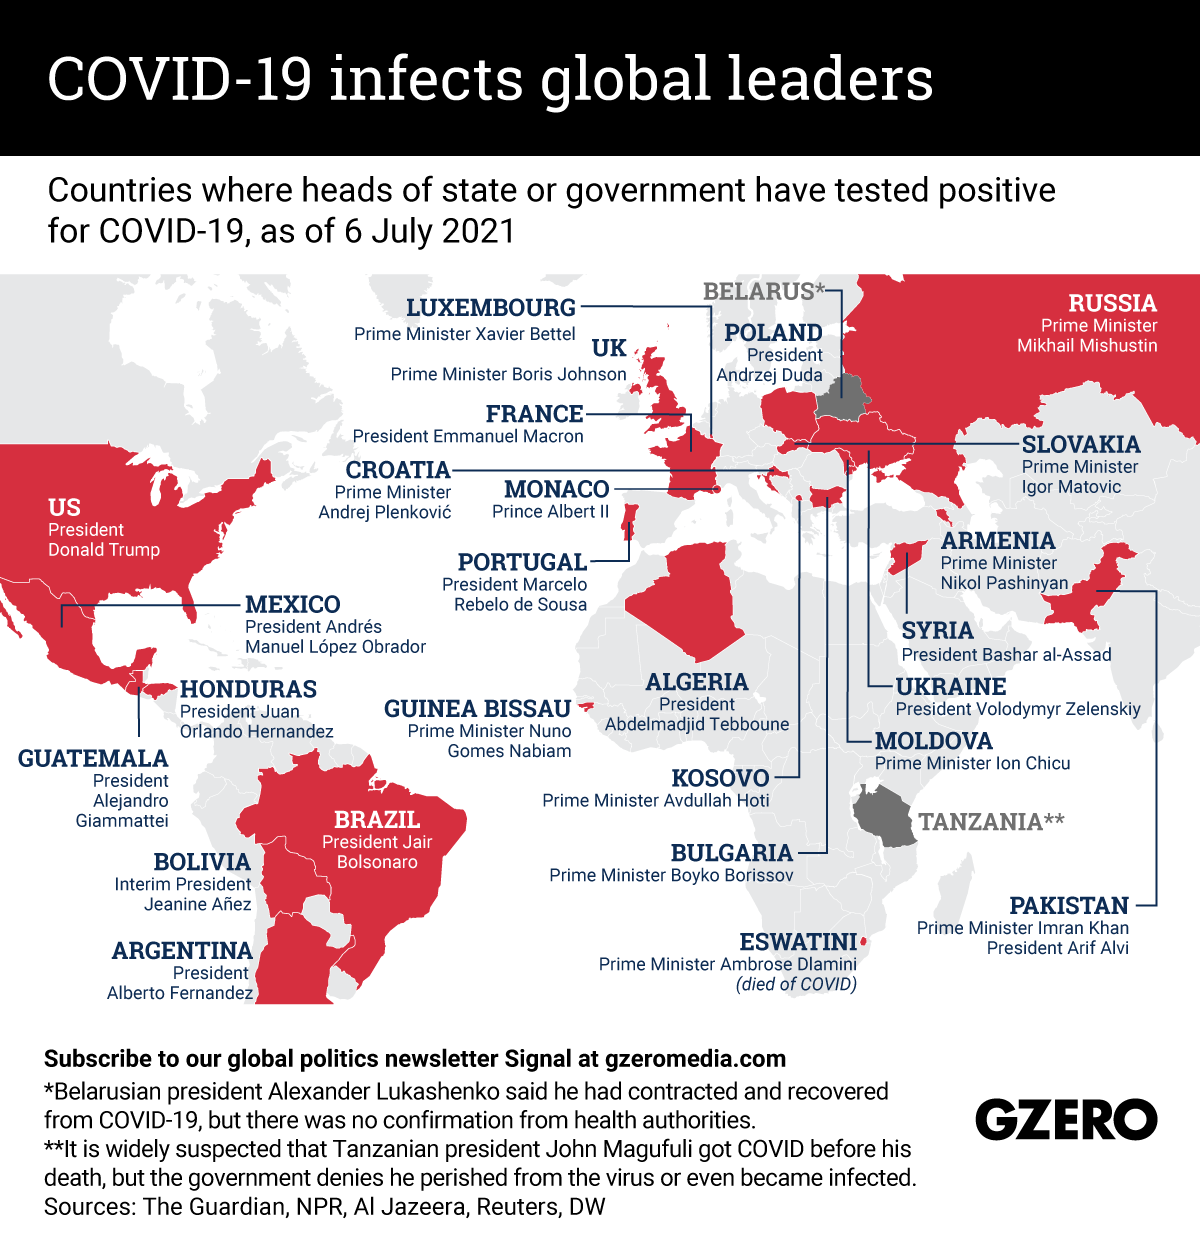 Countries where heads of state or government have tested positive for COVID-19, as of 6 July 2021